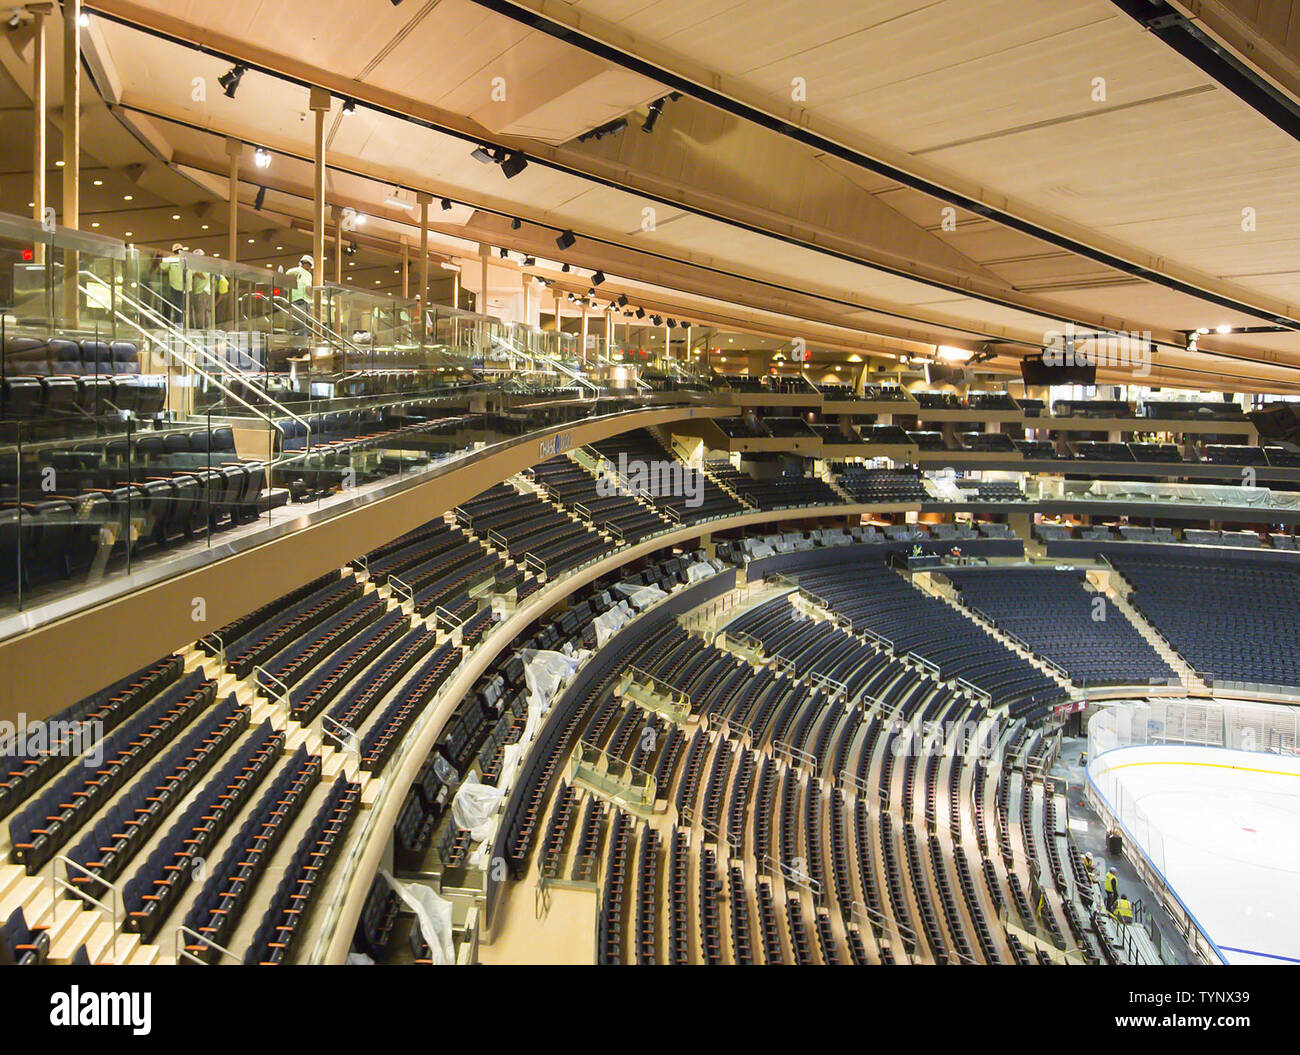 The Chase Bridges Are Fully Installed At Madison Square Garden For